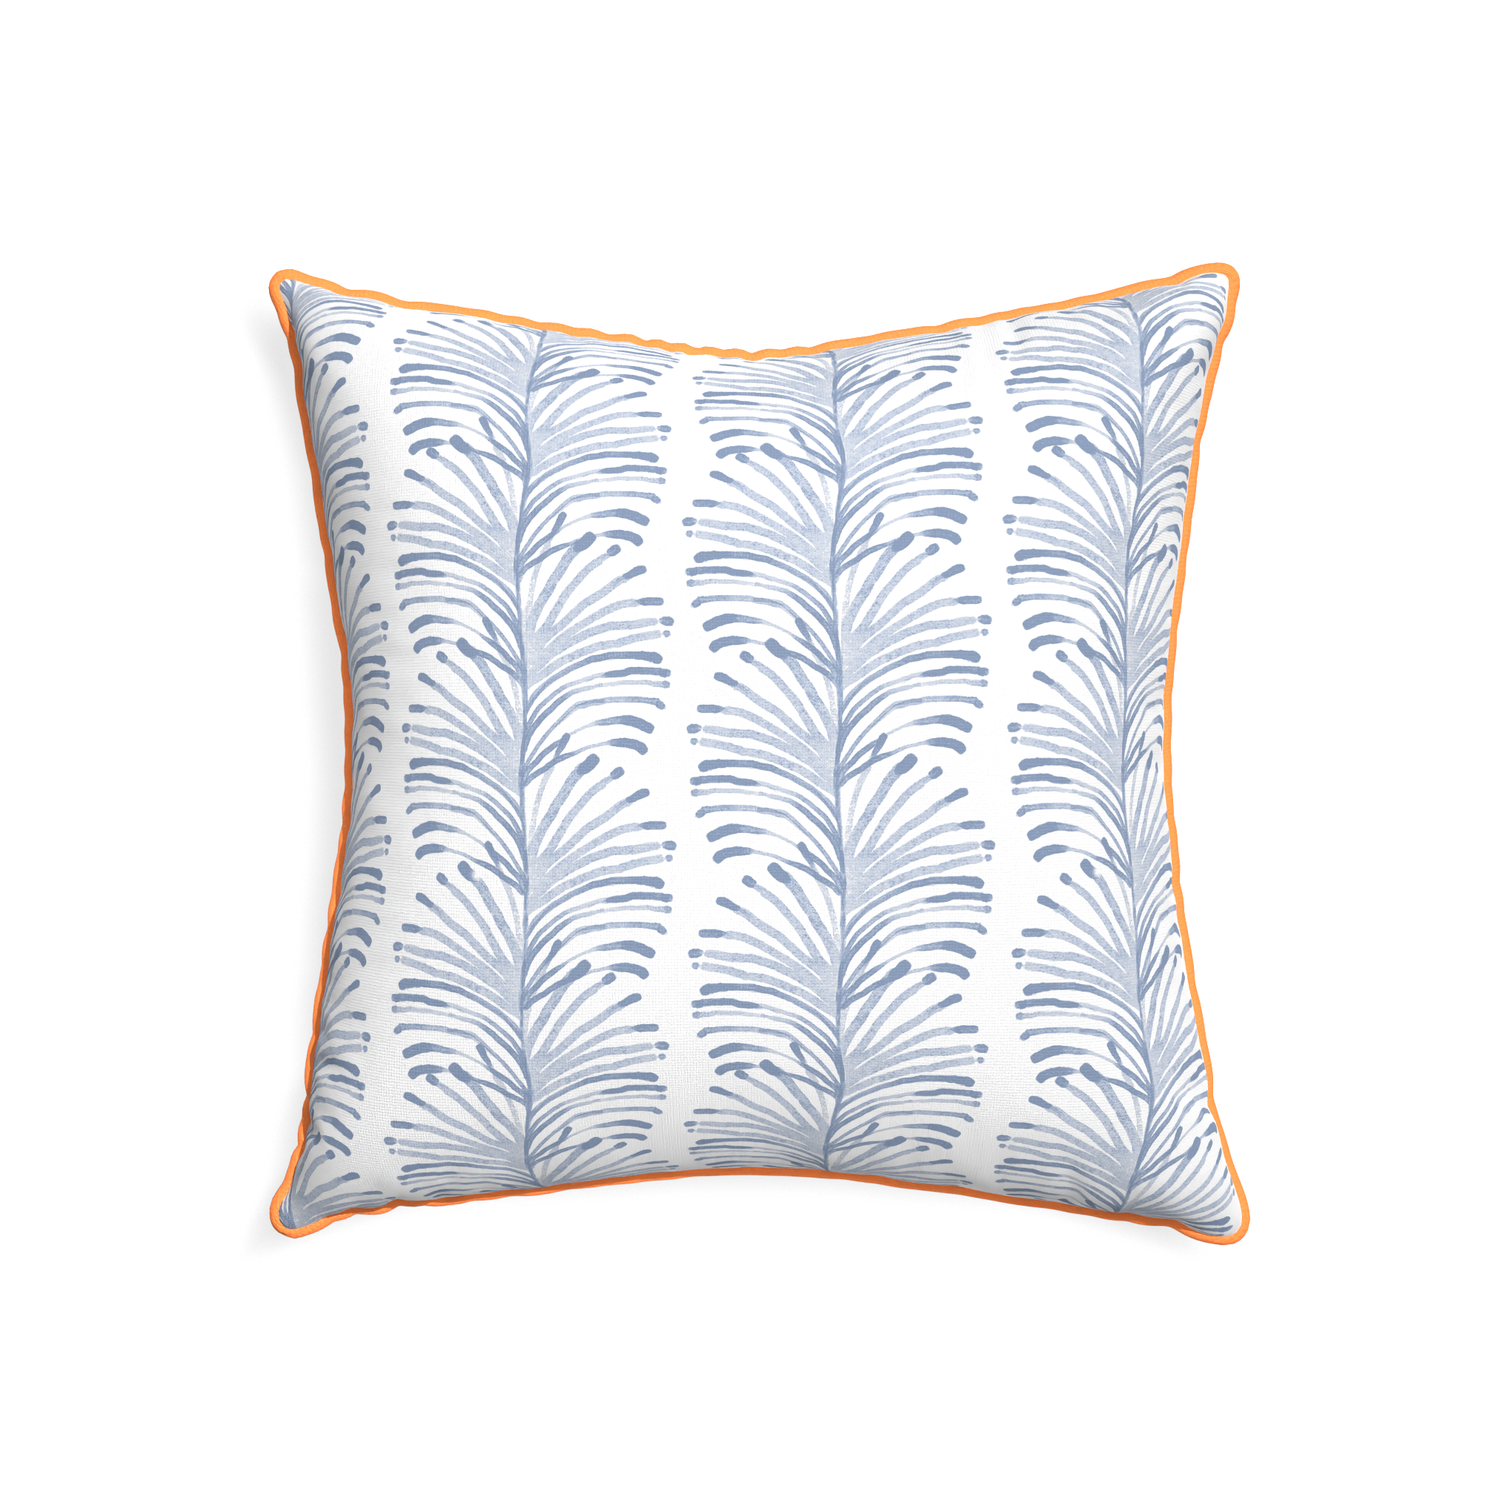 22-square emma sky custom sky blue botanical stripepillow with clementine piping on white background